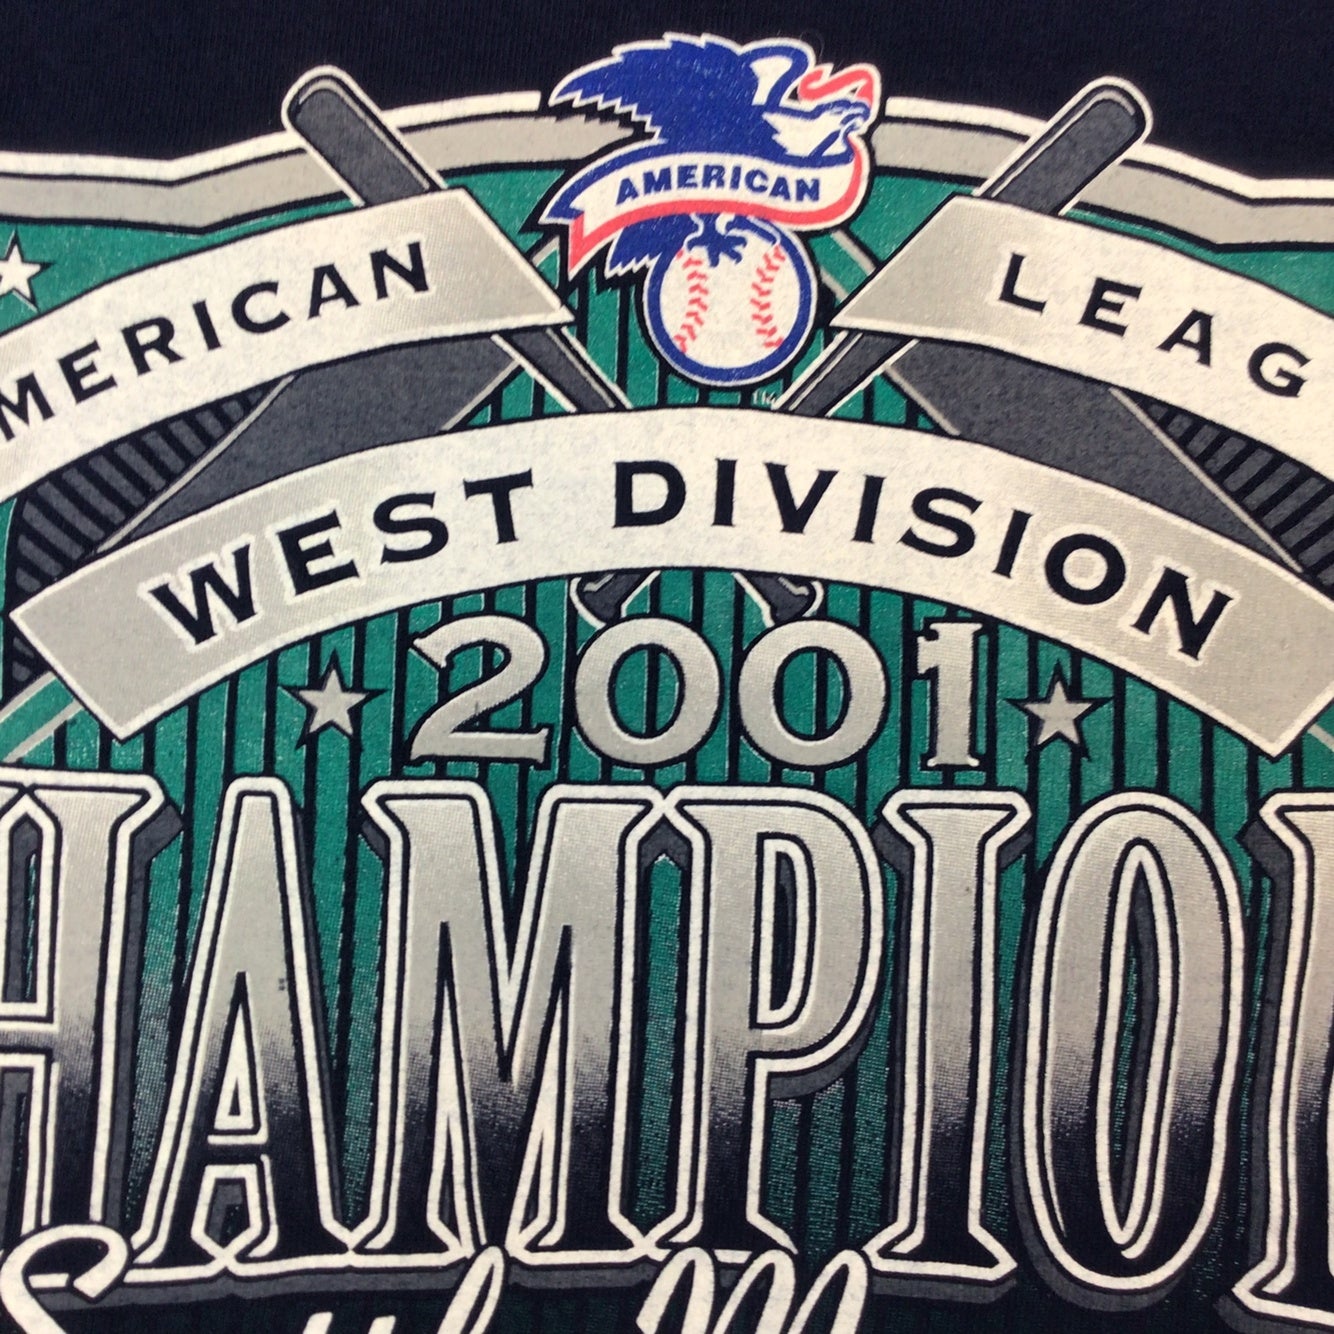 Seattle Mariners 2001 AL West Division Champions MLB T-Shirt - XL